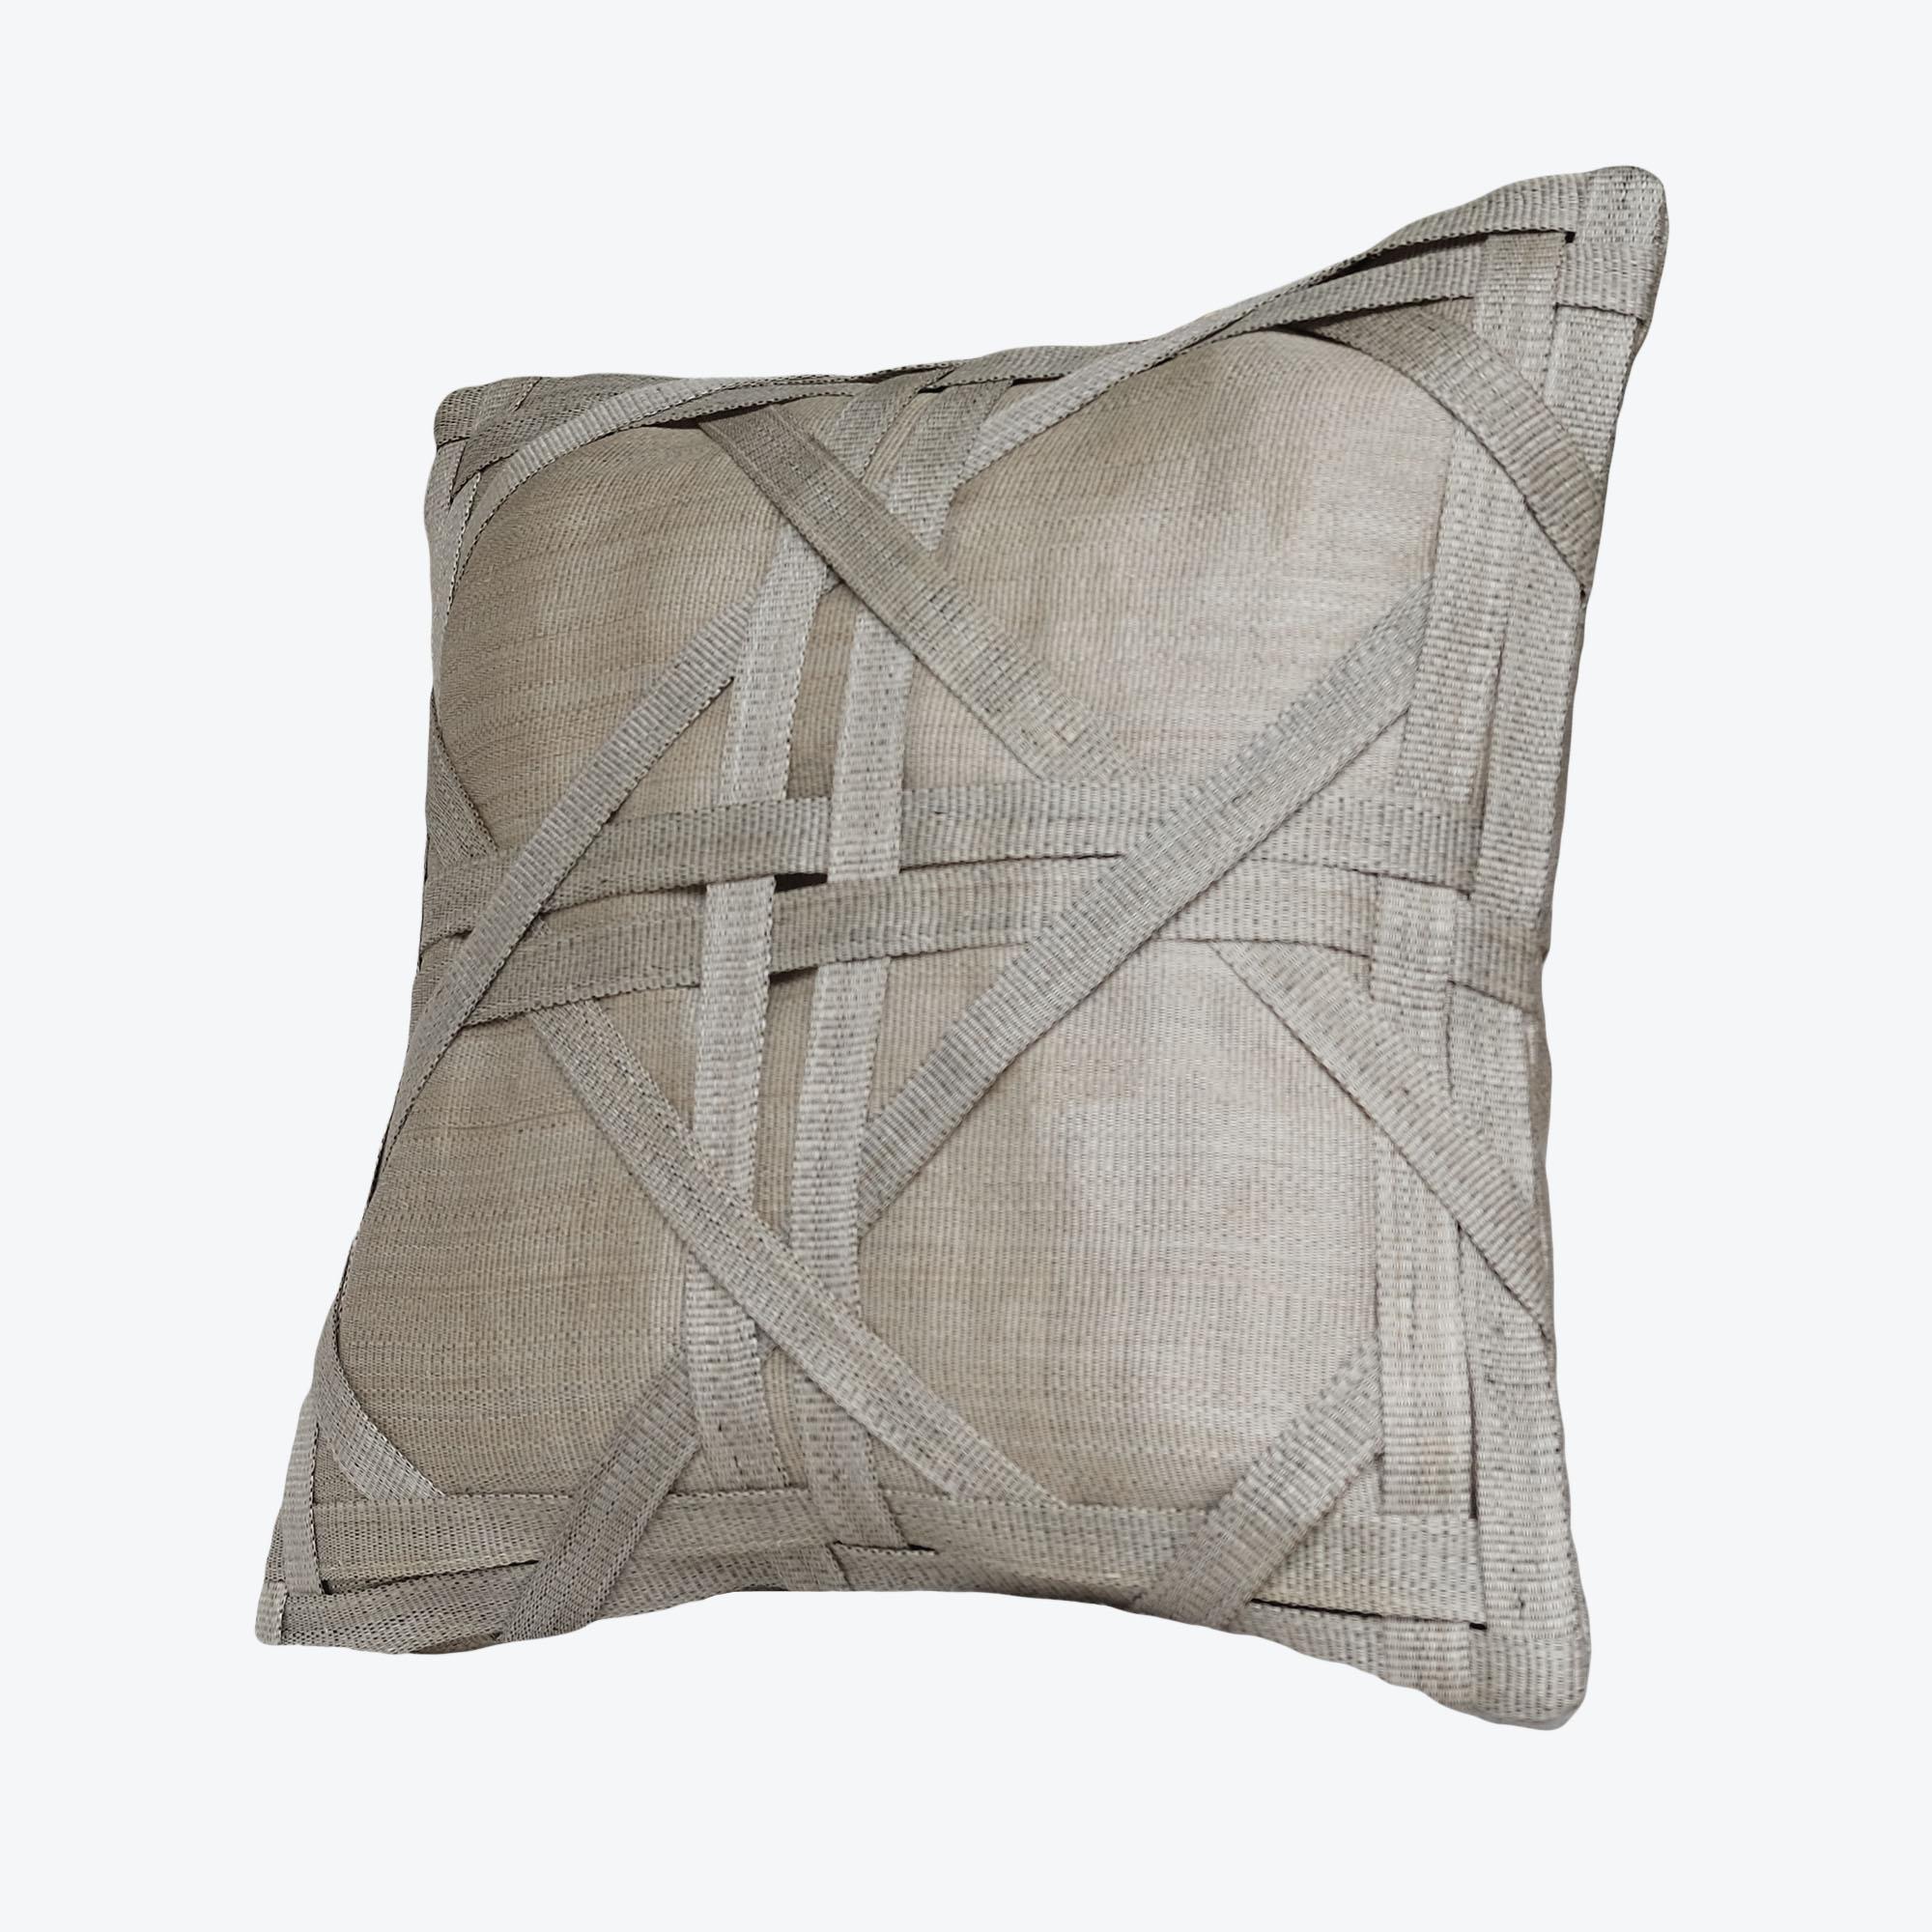 Handcrafted cushion cover made with naturally dyed and delicately woven T’nalak cloth from Abaca fibres and fastened with coconut shell buttons
Colour: grey

45 x 45 cm
17.7 x 17.7in
Recommended cushion filler: 56 x 56 cm / 22 x 22in

Cushion